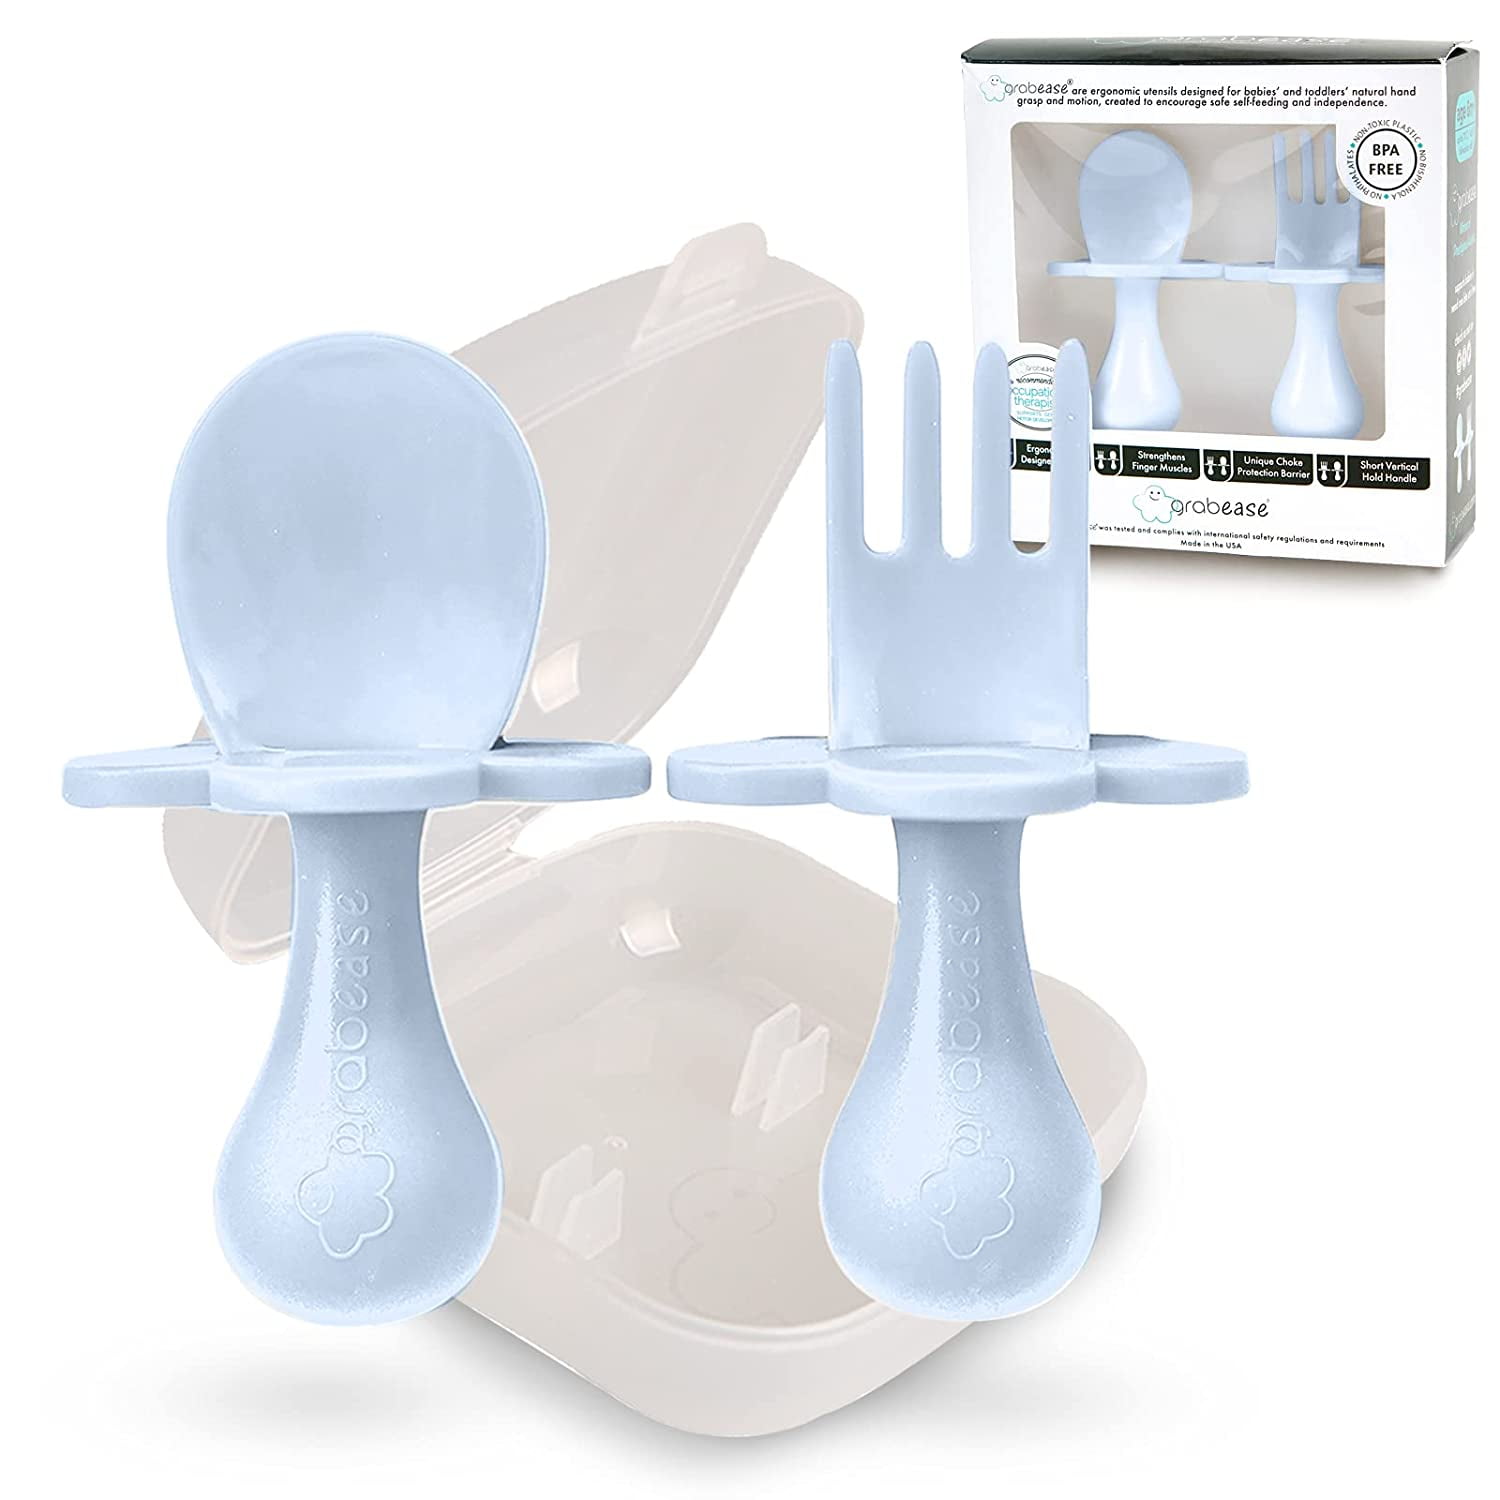 Nooli First Self-Feeding Utensils: USA-Made, BPA-Free Spoon & Fork Set for  Babies & Toddlers Ages 6+ Months, Anti-Choke Shield, Easy-Grip Handles for  Baby-Led Weaning and Independent Eating (Lavender) 